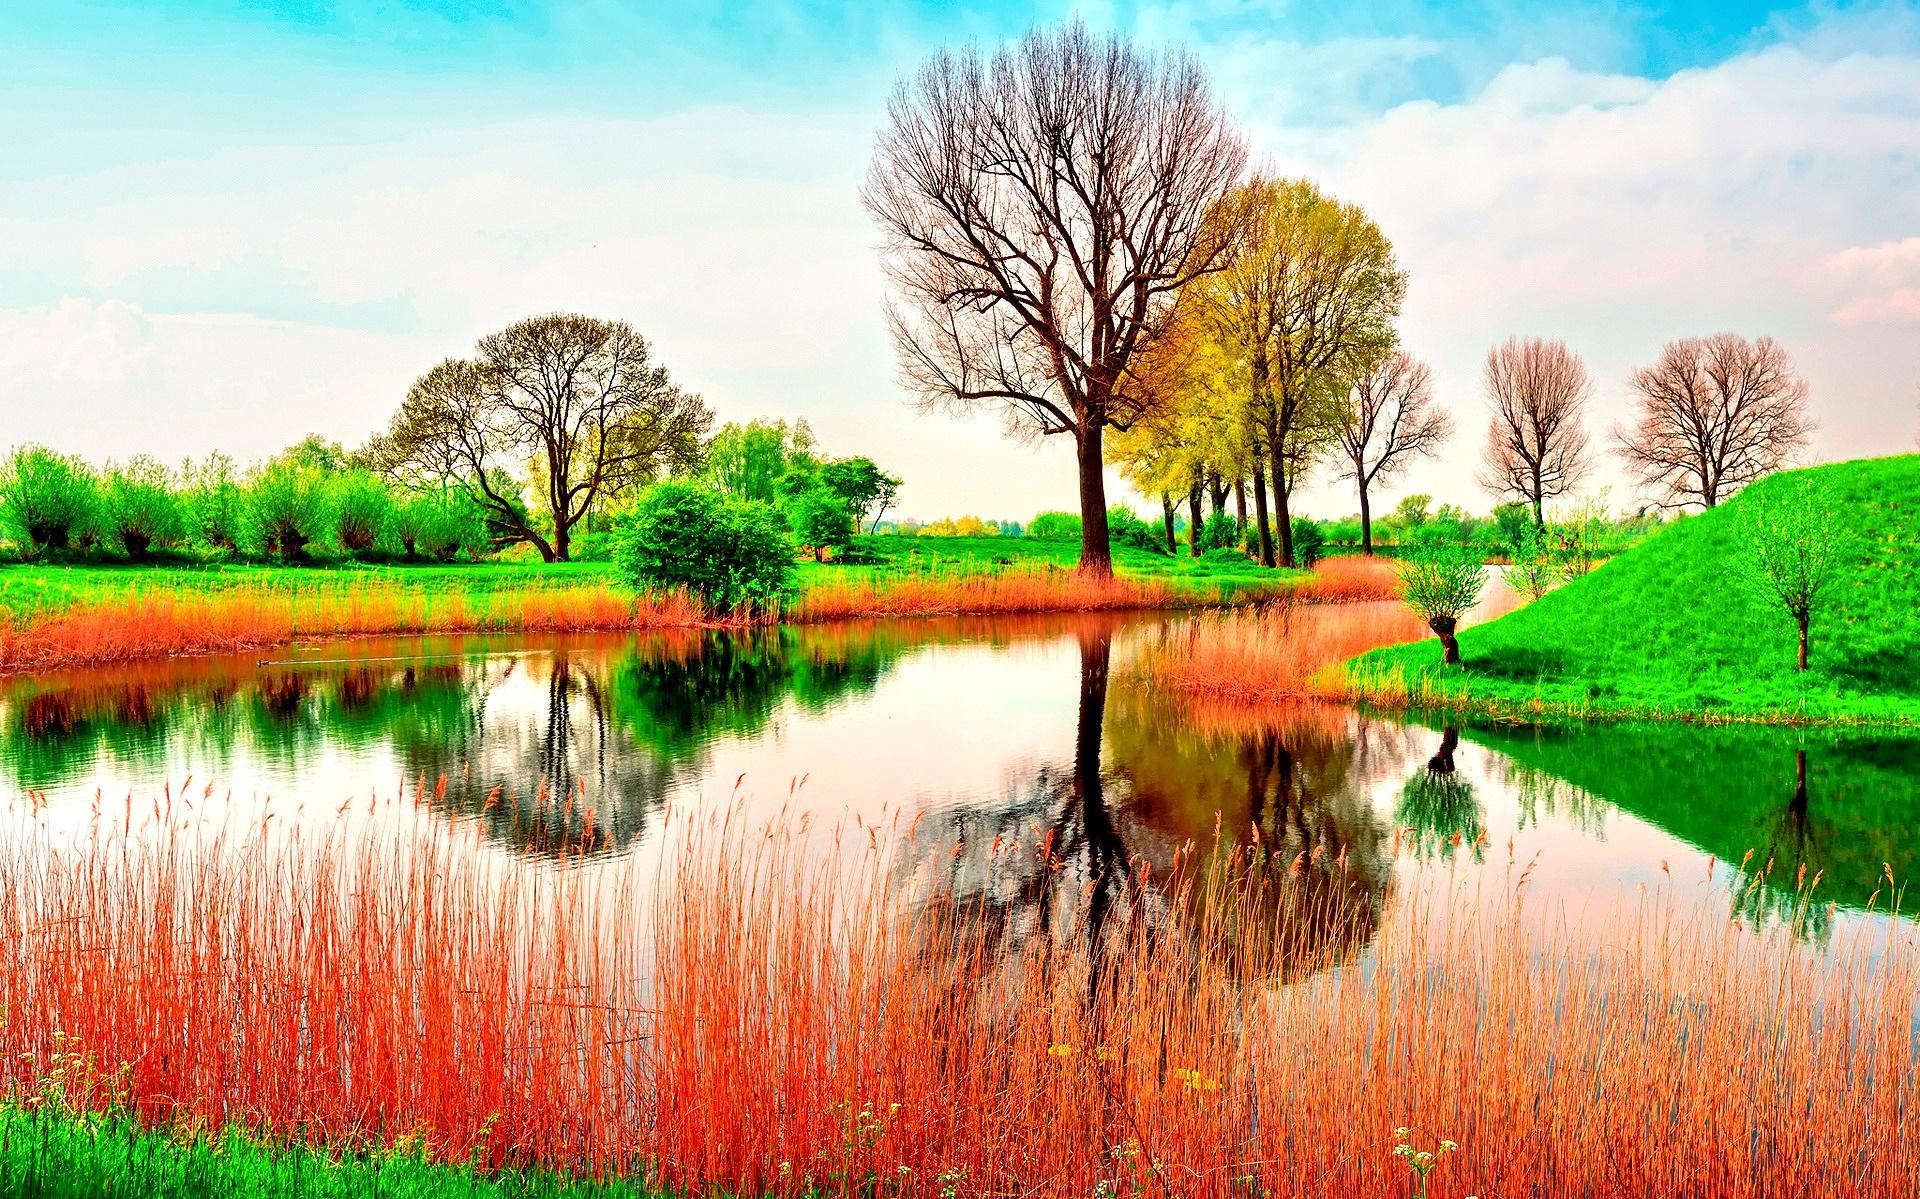 Picturesque Lake In A Colorful Vibrant Landscape Image